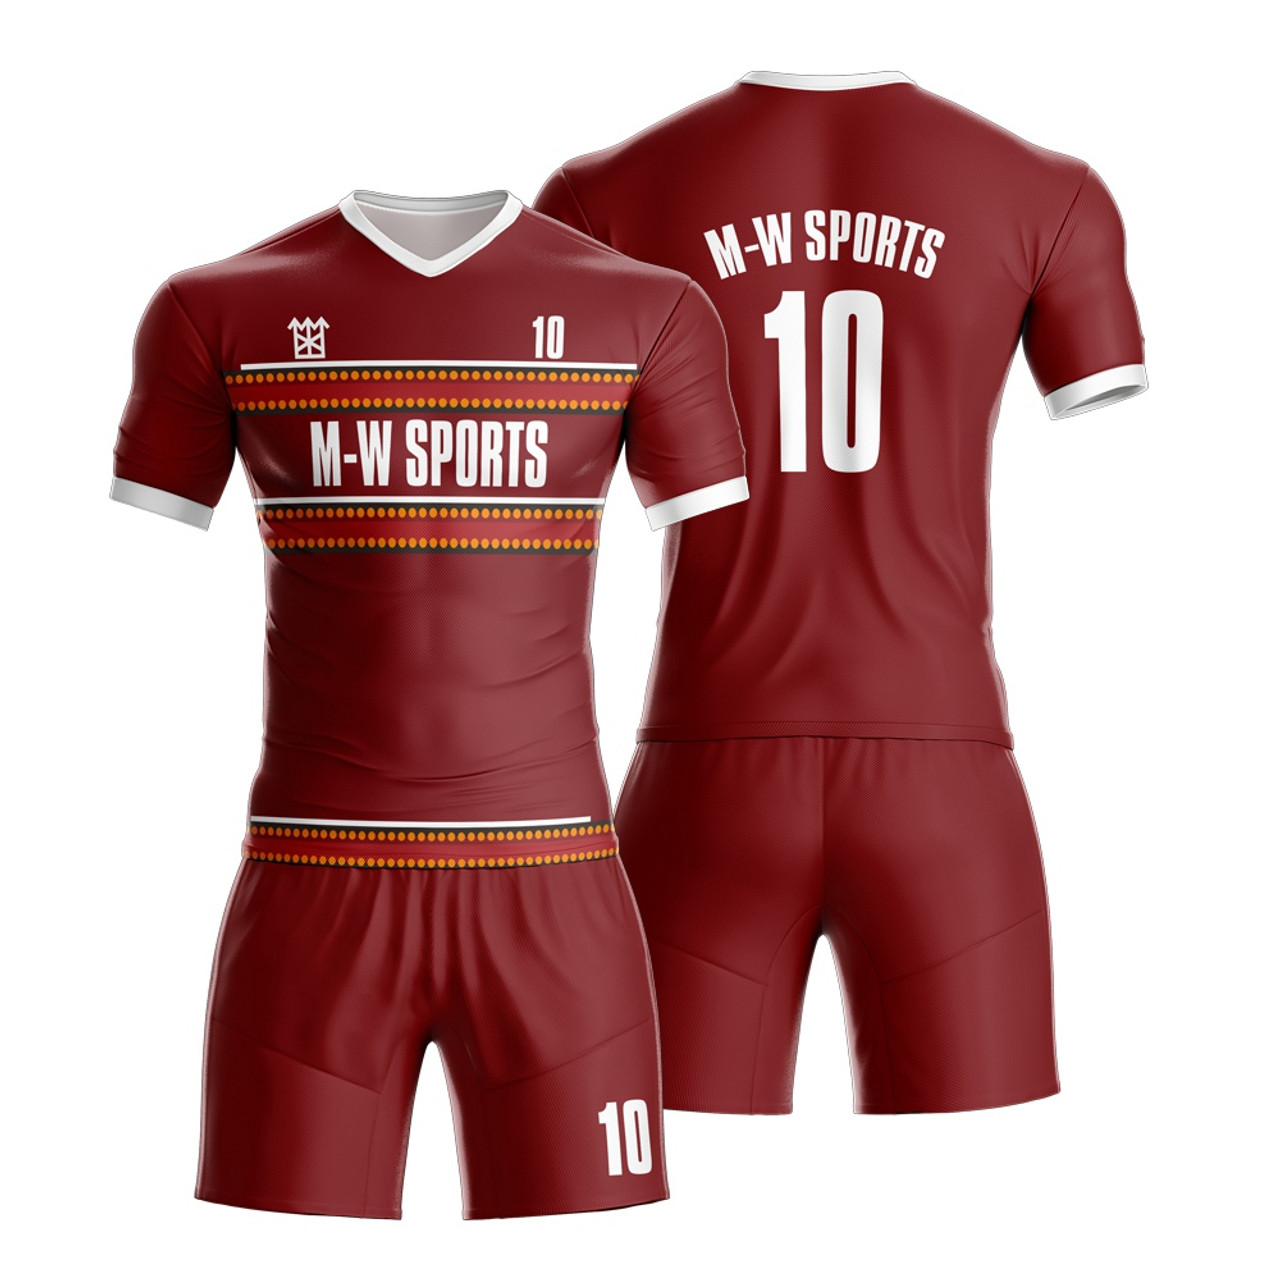 Maroon American Football T Shirt Jersey Manufacturer in USA